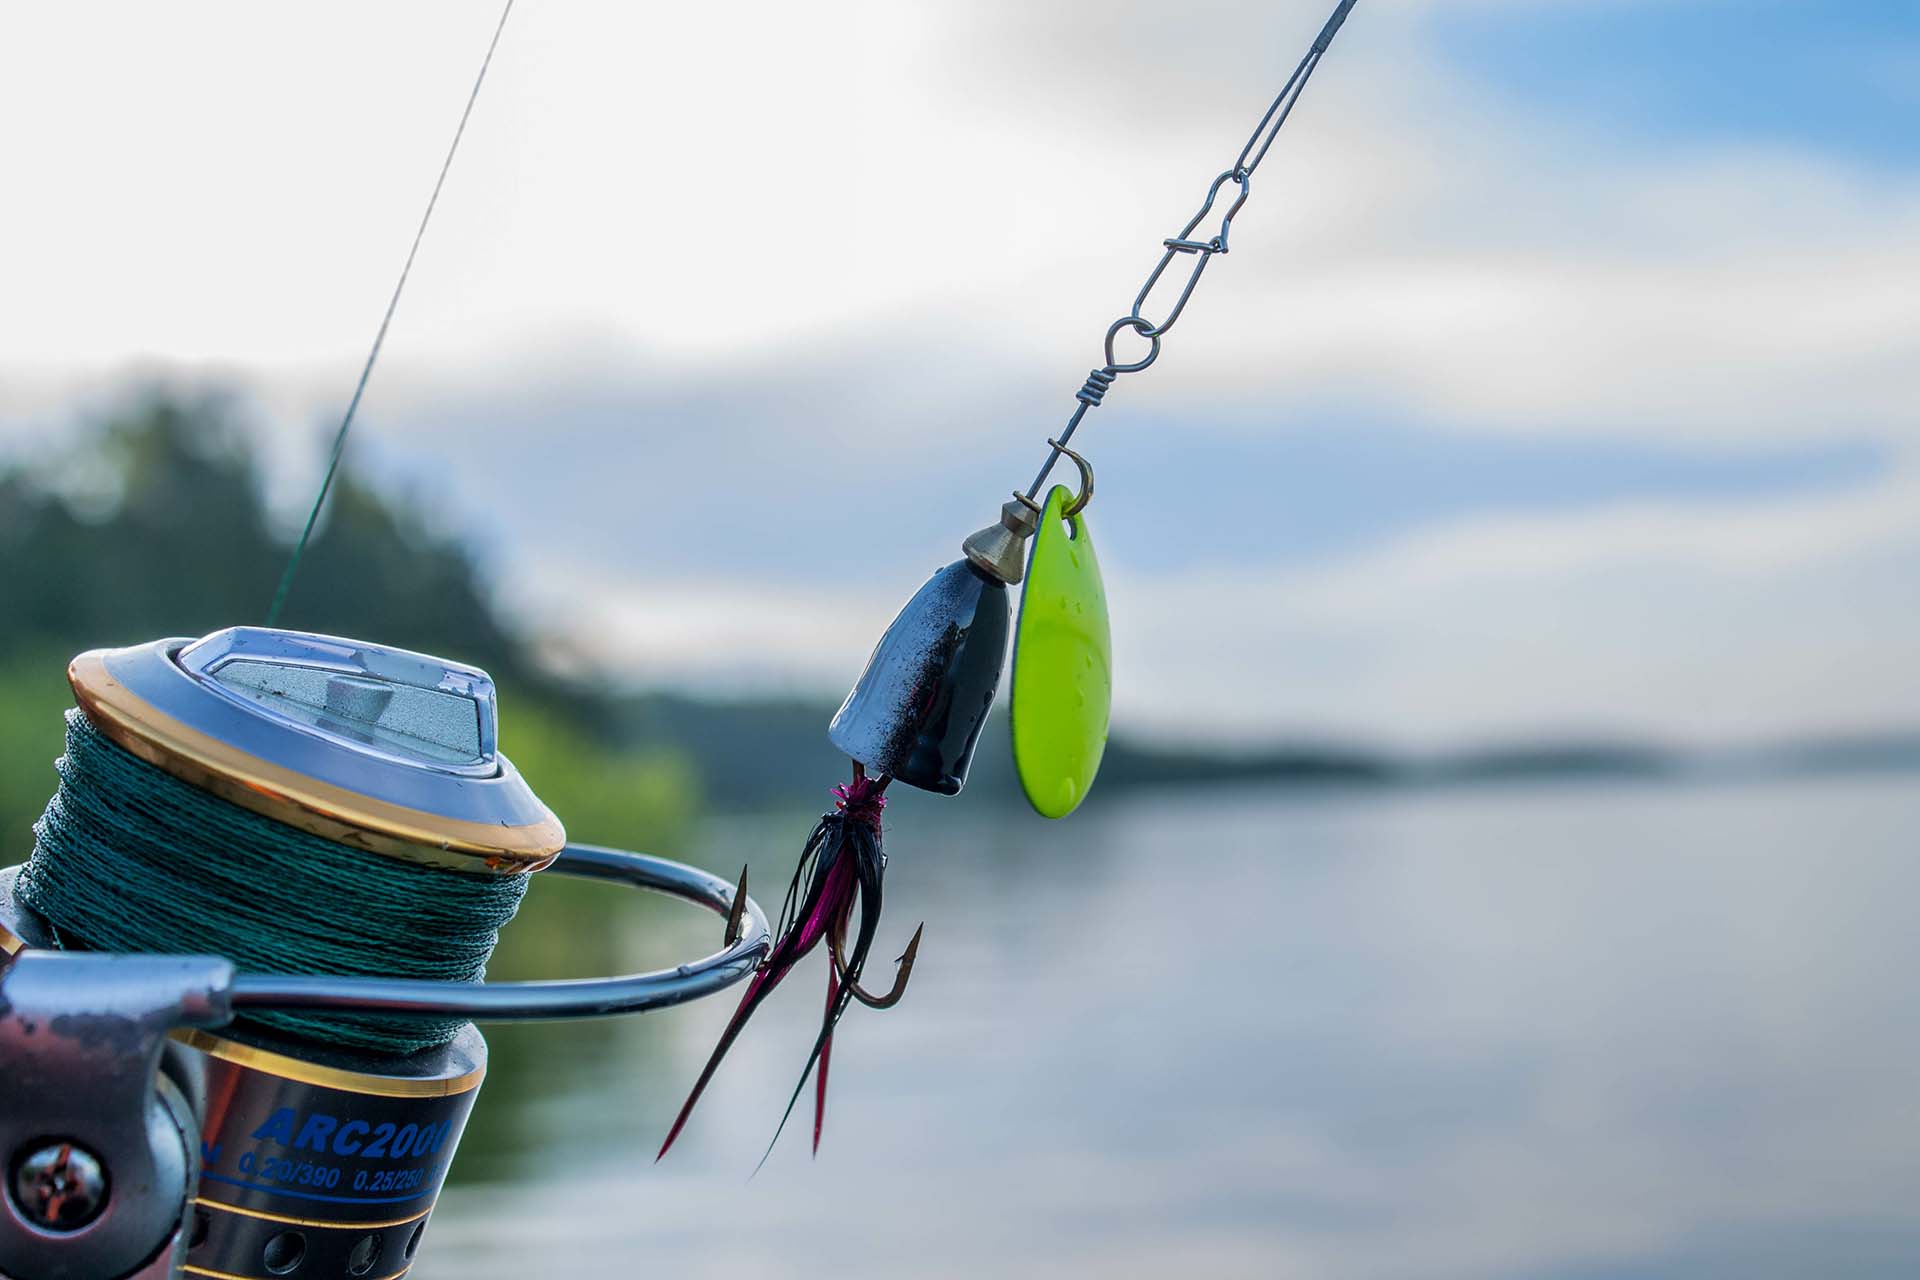 Spinning lure on a fishing reel 